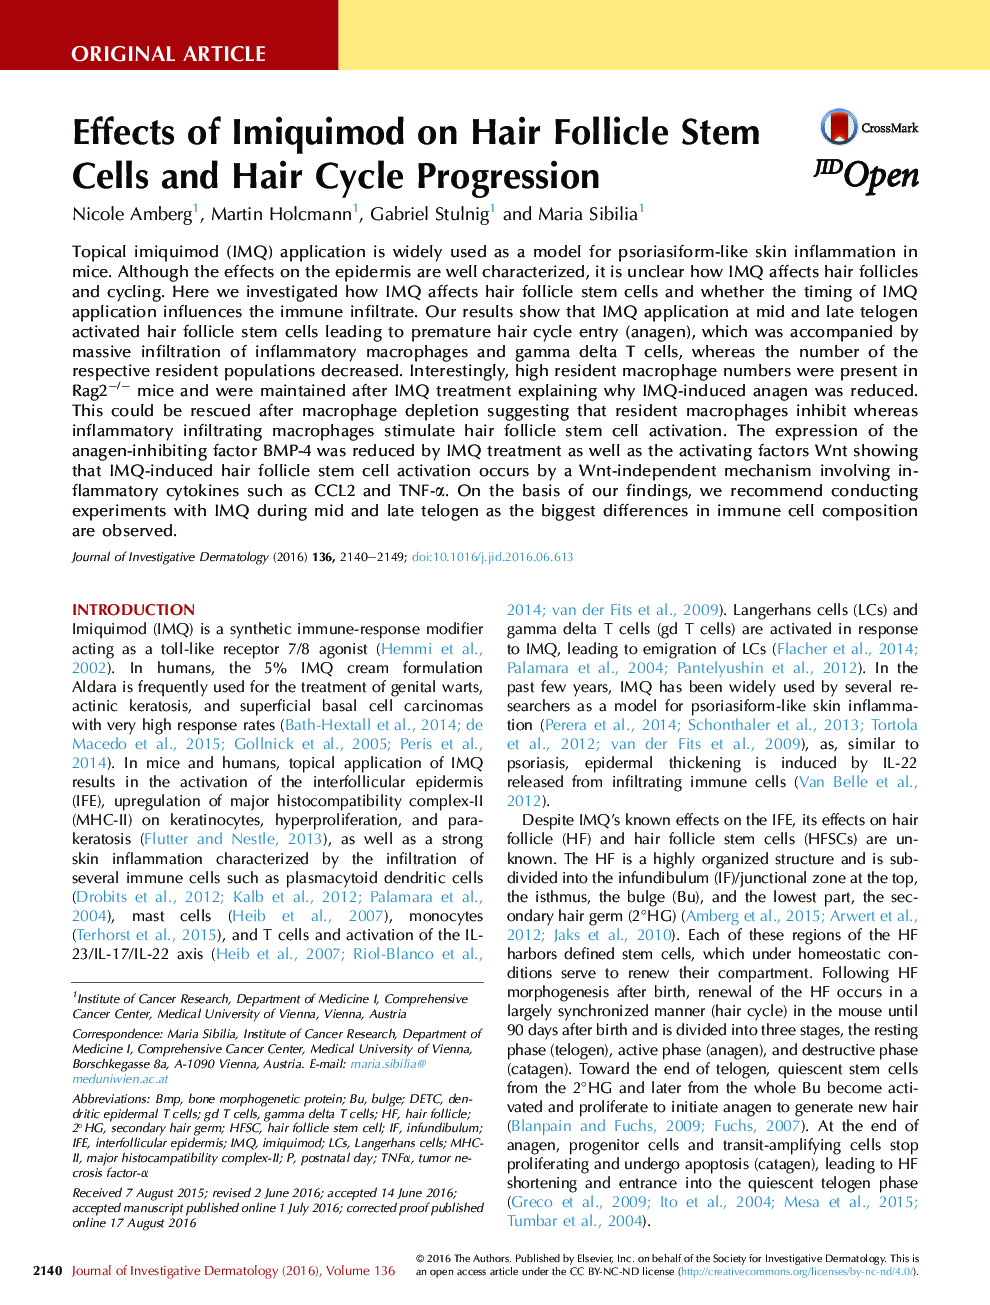 Effects of Imiquimod on Hair Follicle Stem Cells and Hair Cycle Progression